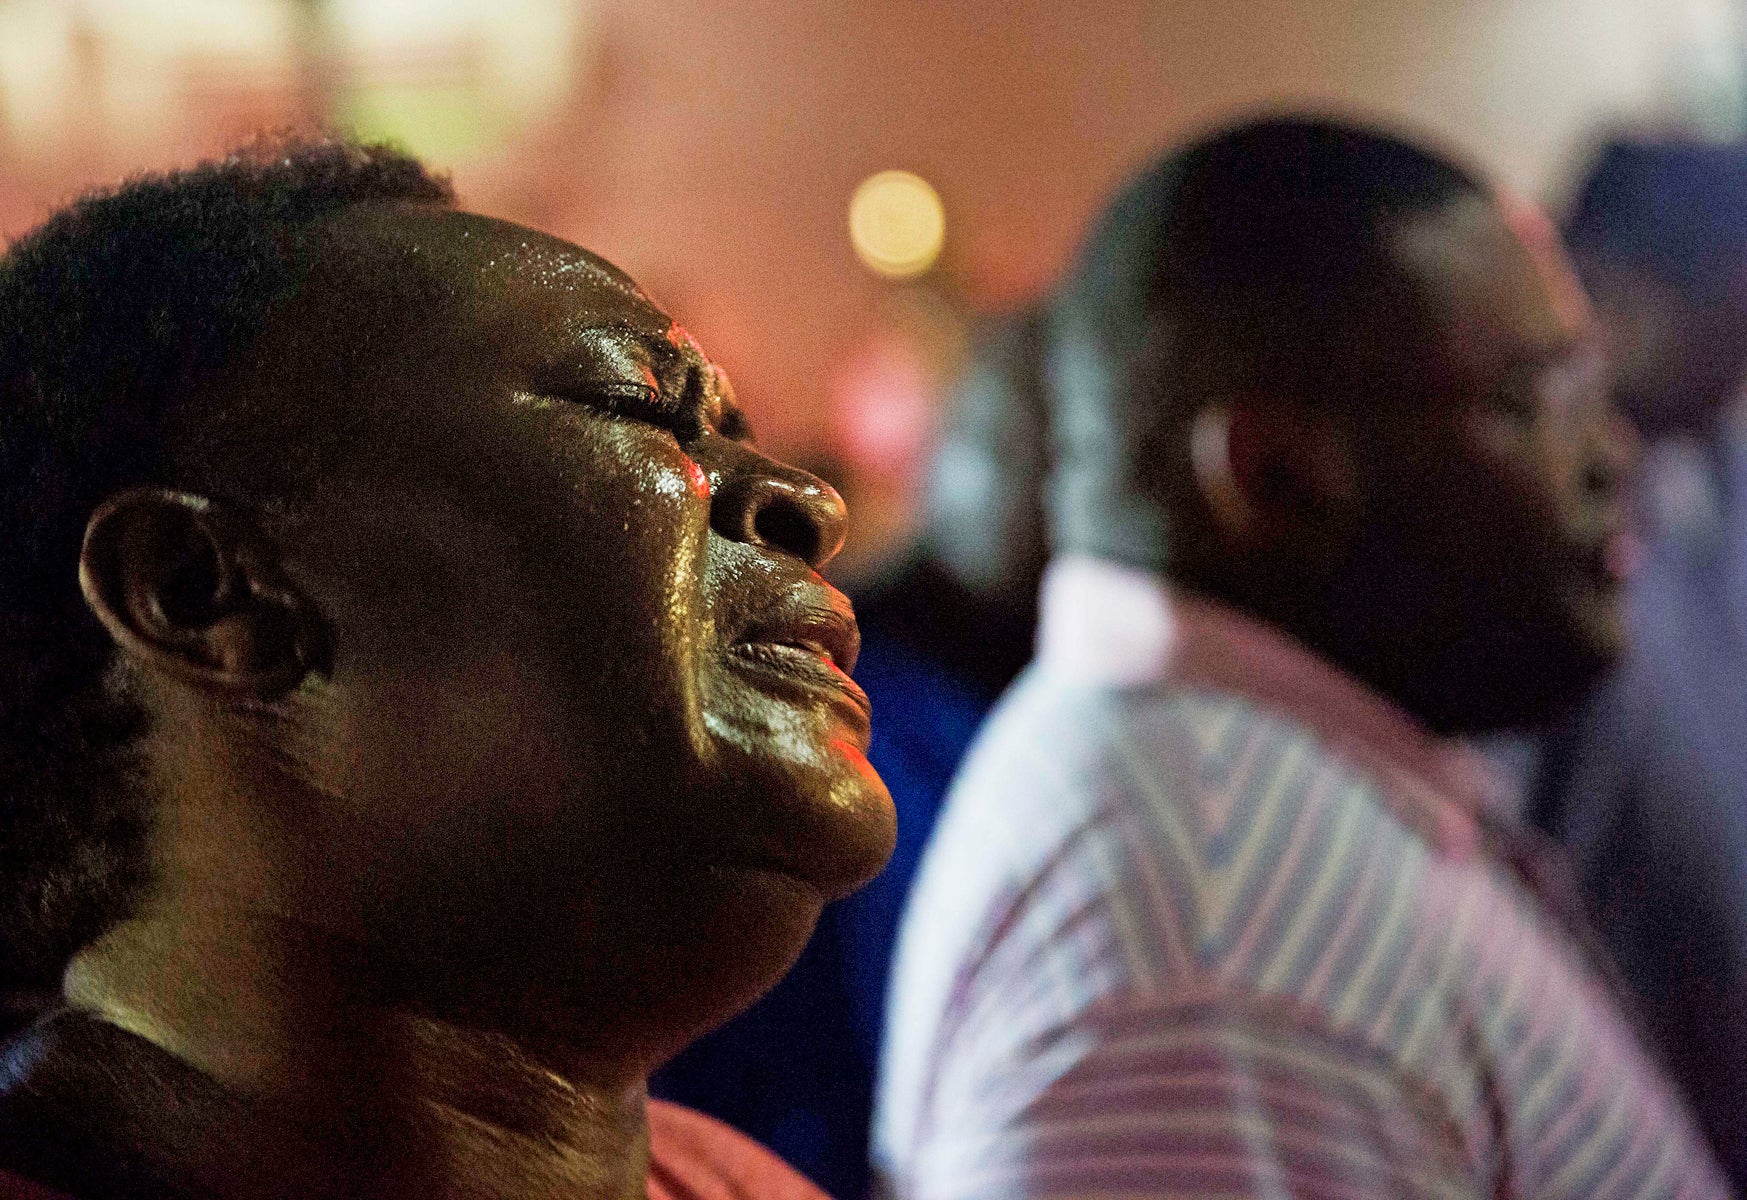 Remembering Charleston: Photos from the Tragedy at Mother Emanuel
